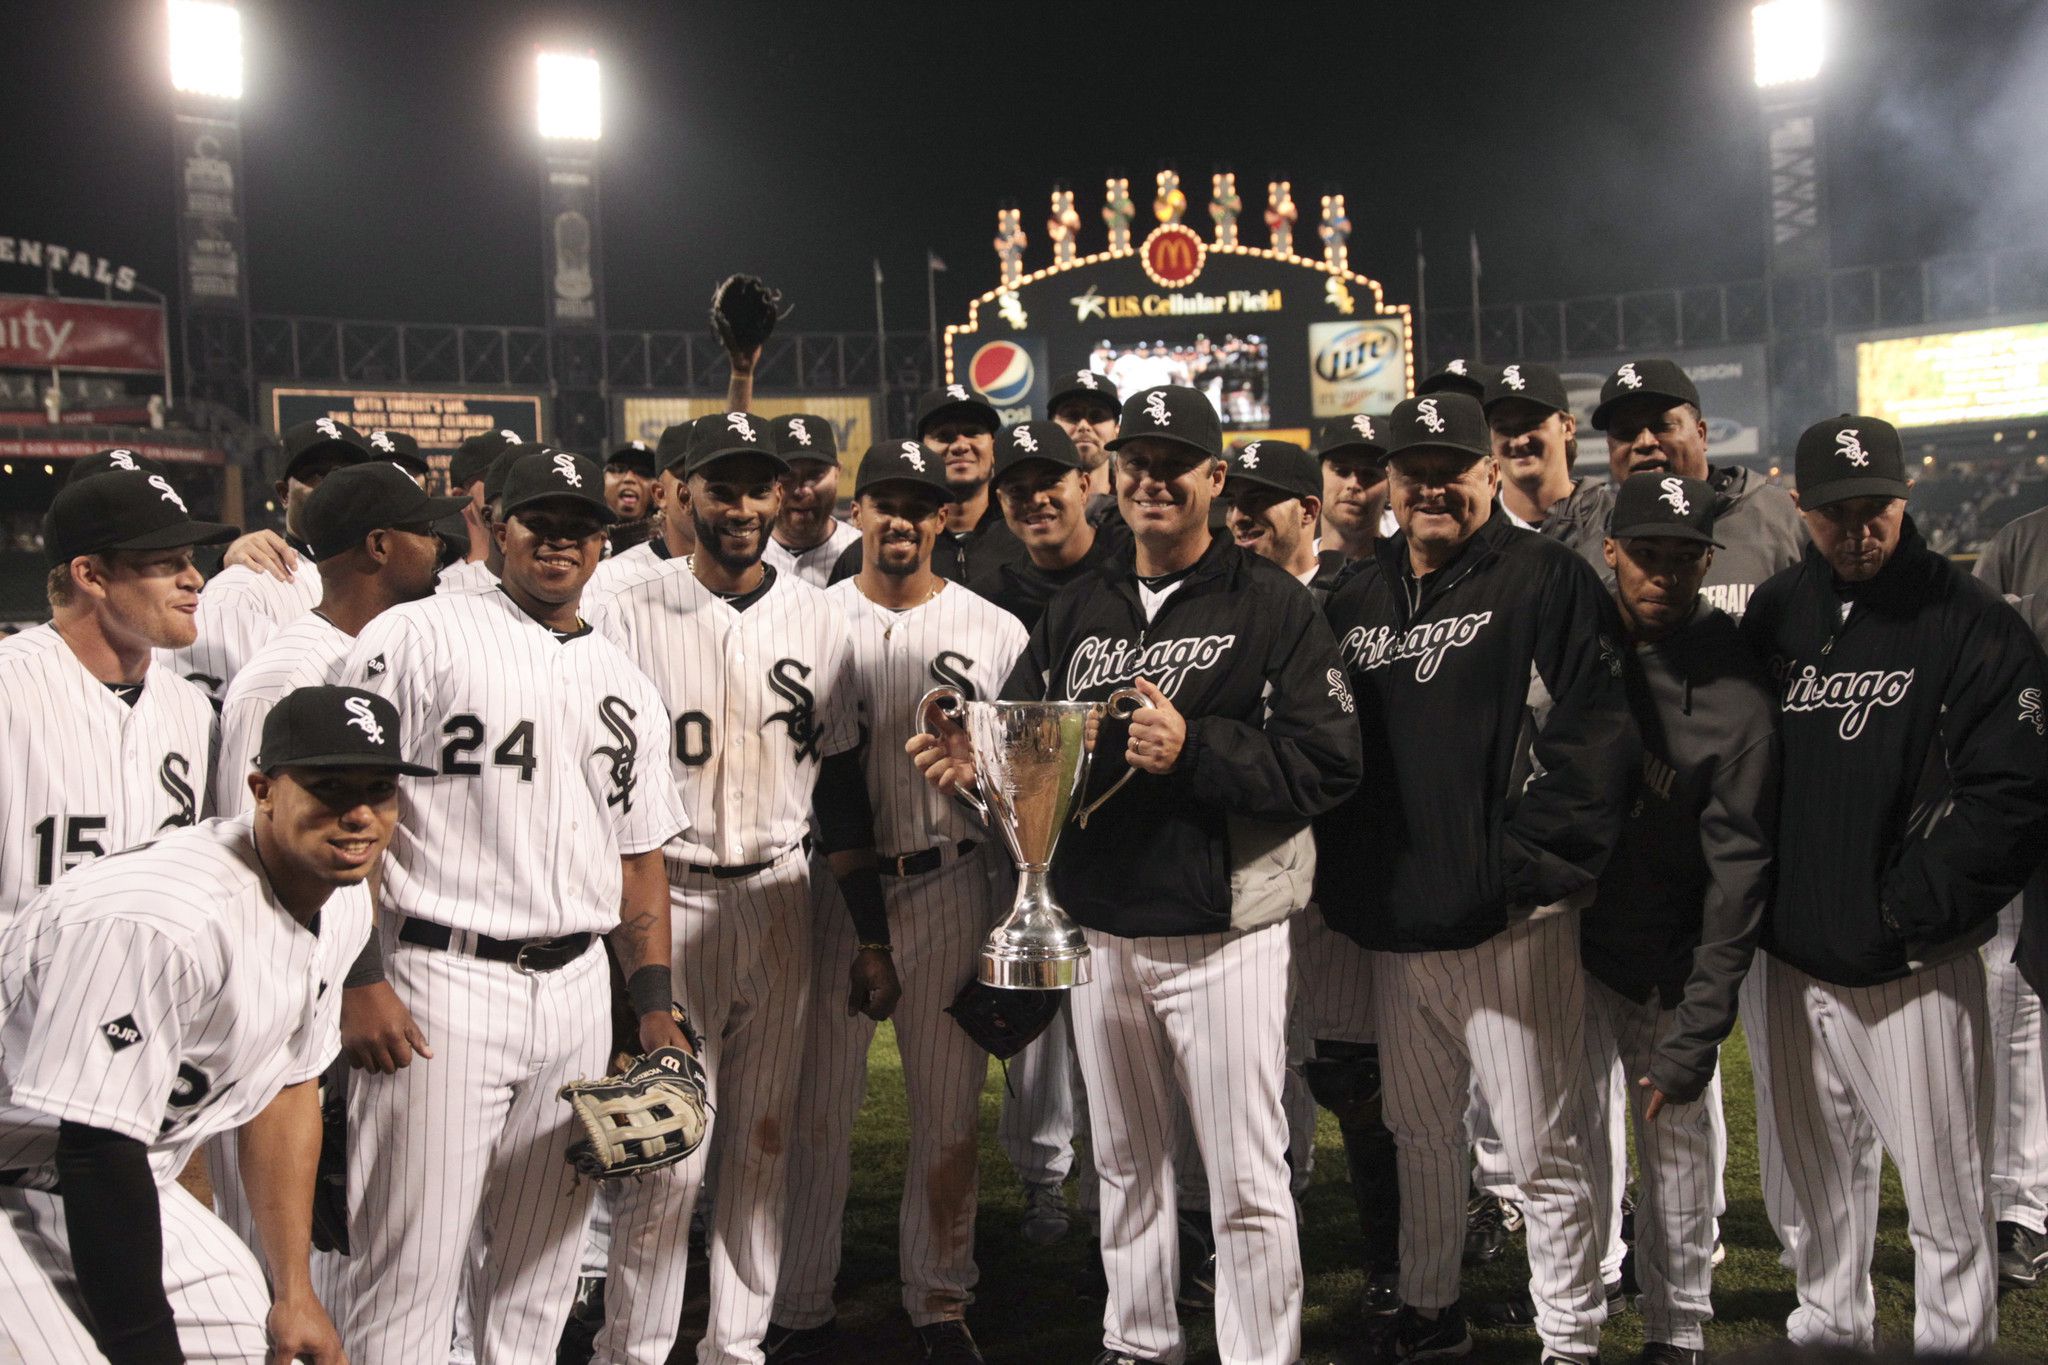 Cubs Vs. White Sox: 2006 Crosstown Classic Became Base-Brawl Game (VIDEO)